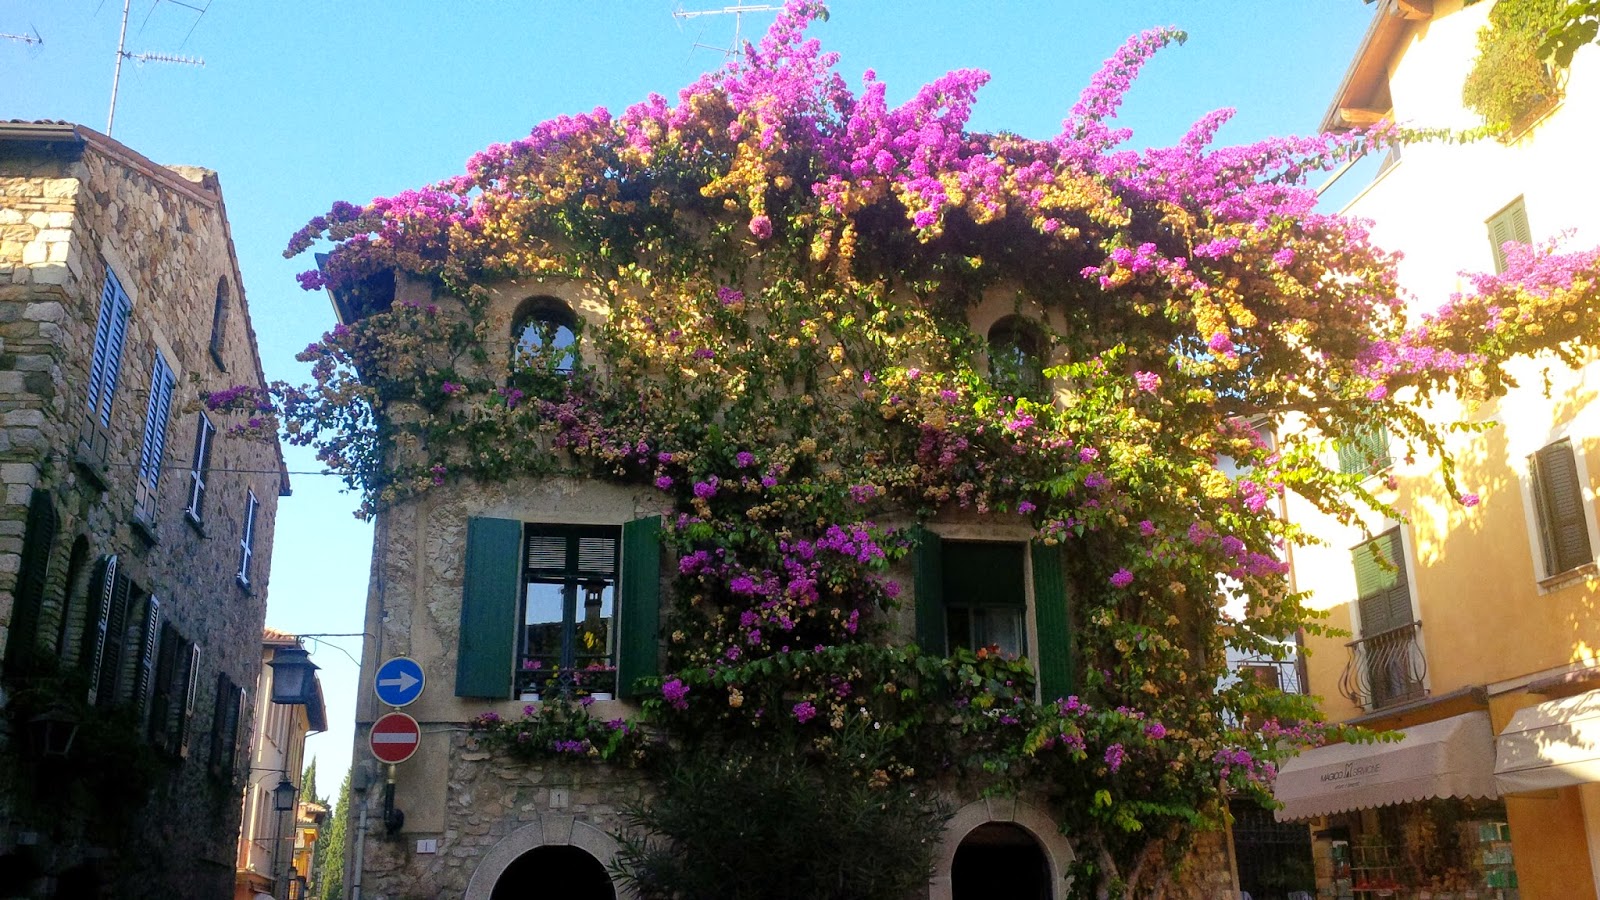 A fabulous covered in a flowering bush house in Sirmione